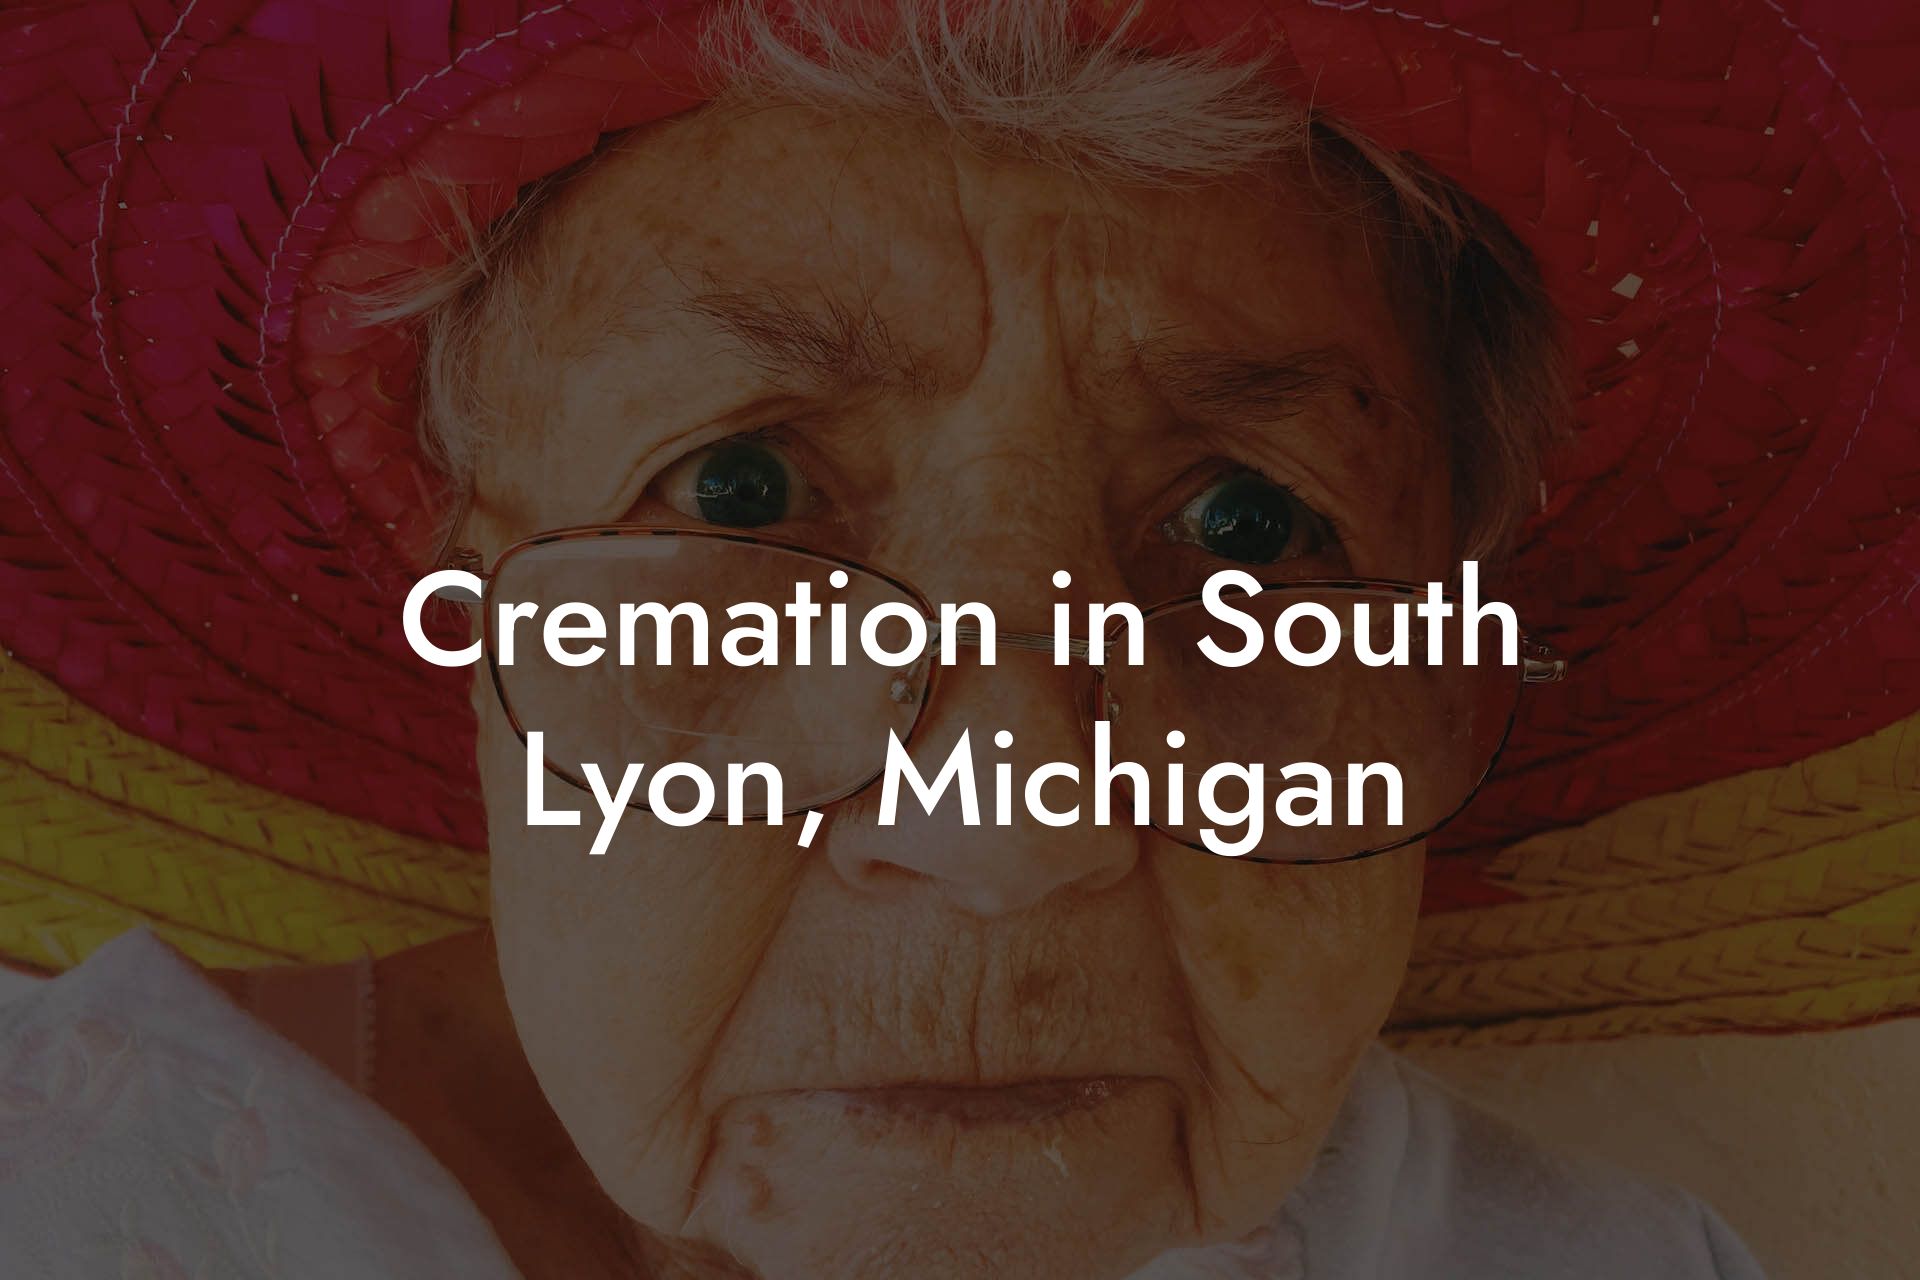 Cremation in South Lyon, Michigan